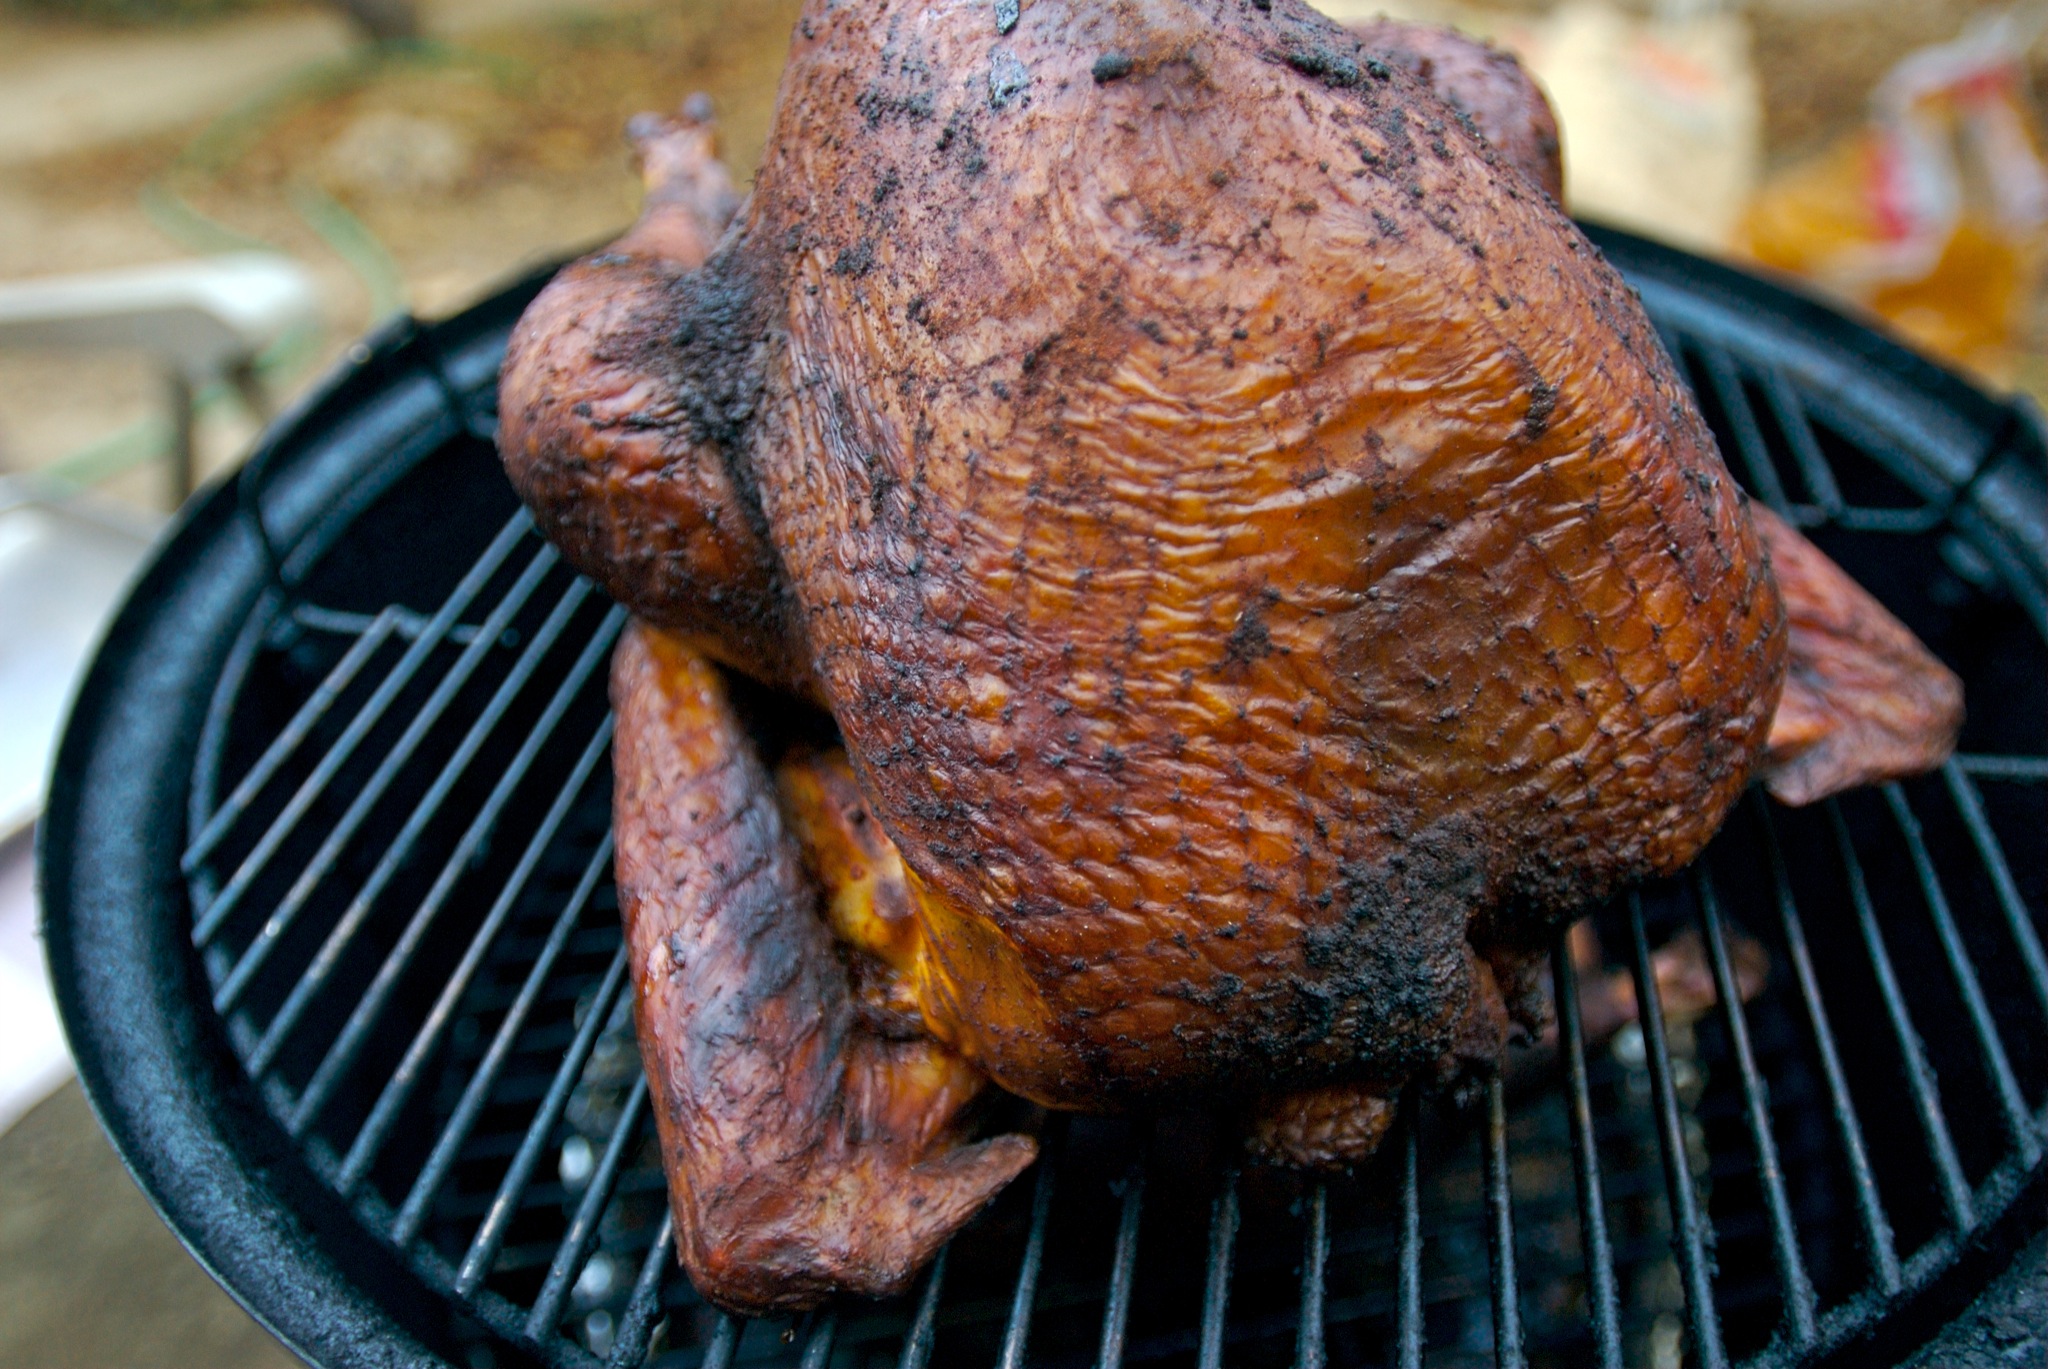 Turkey roasting on a barbeque grill.